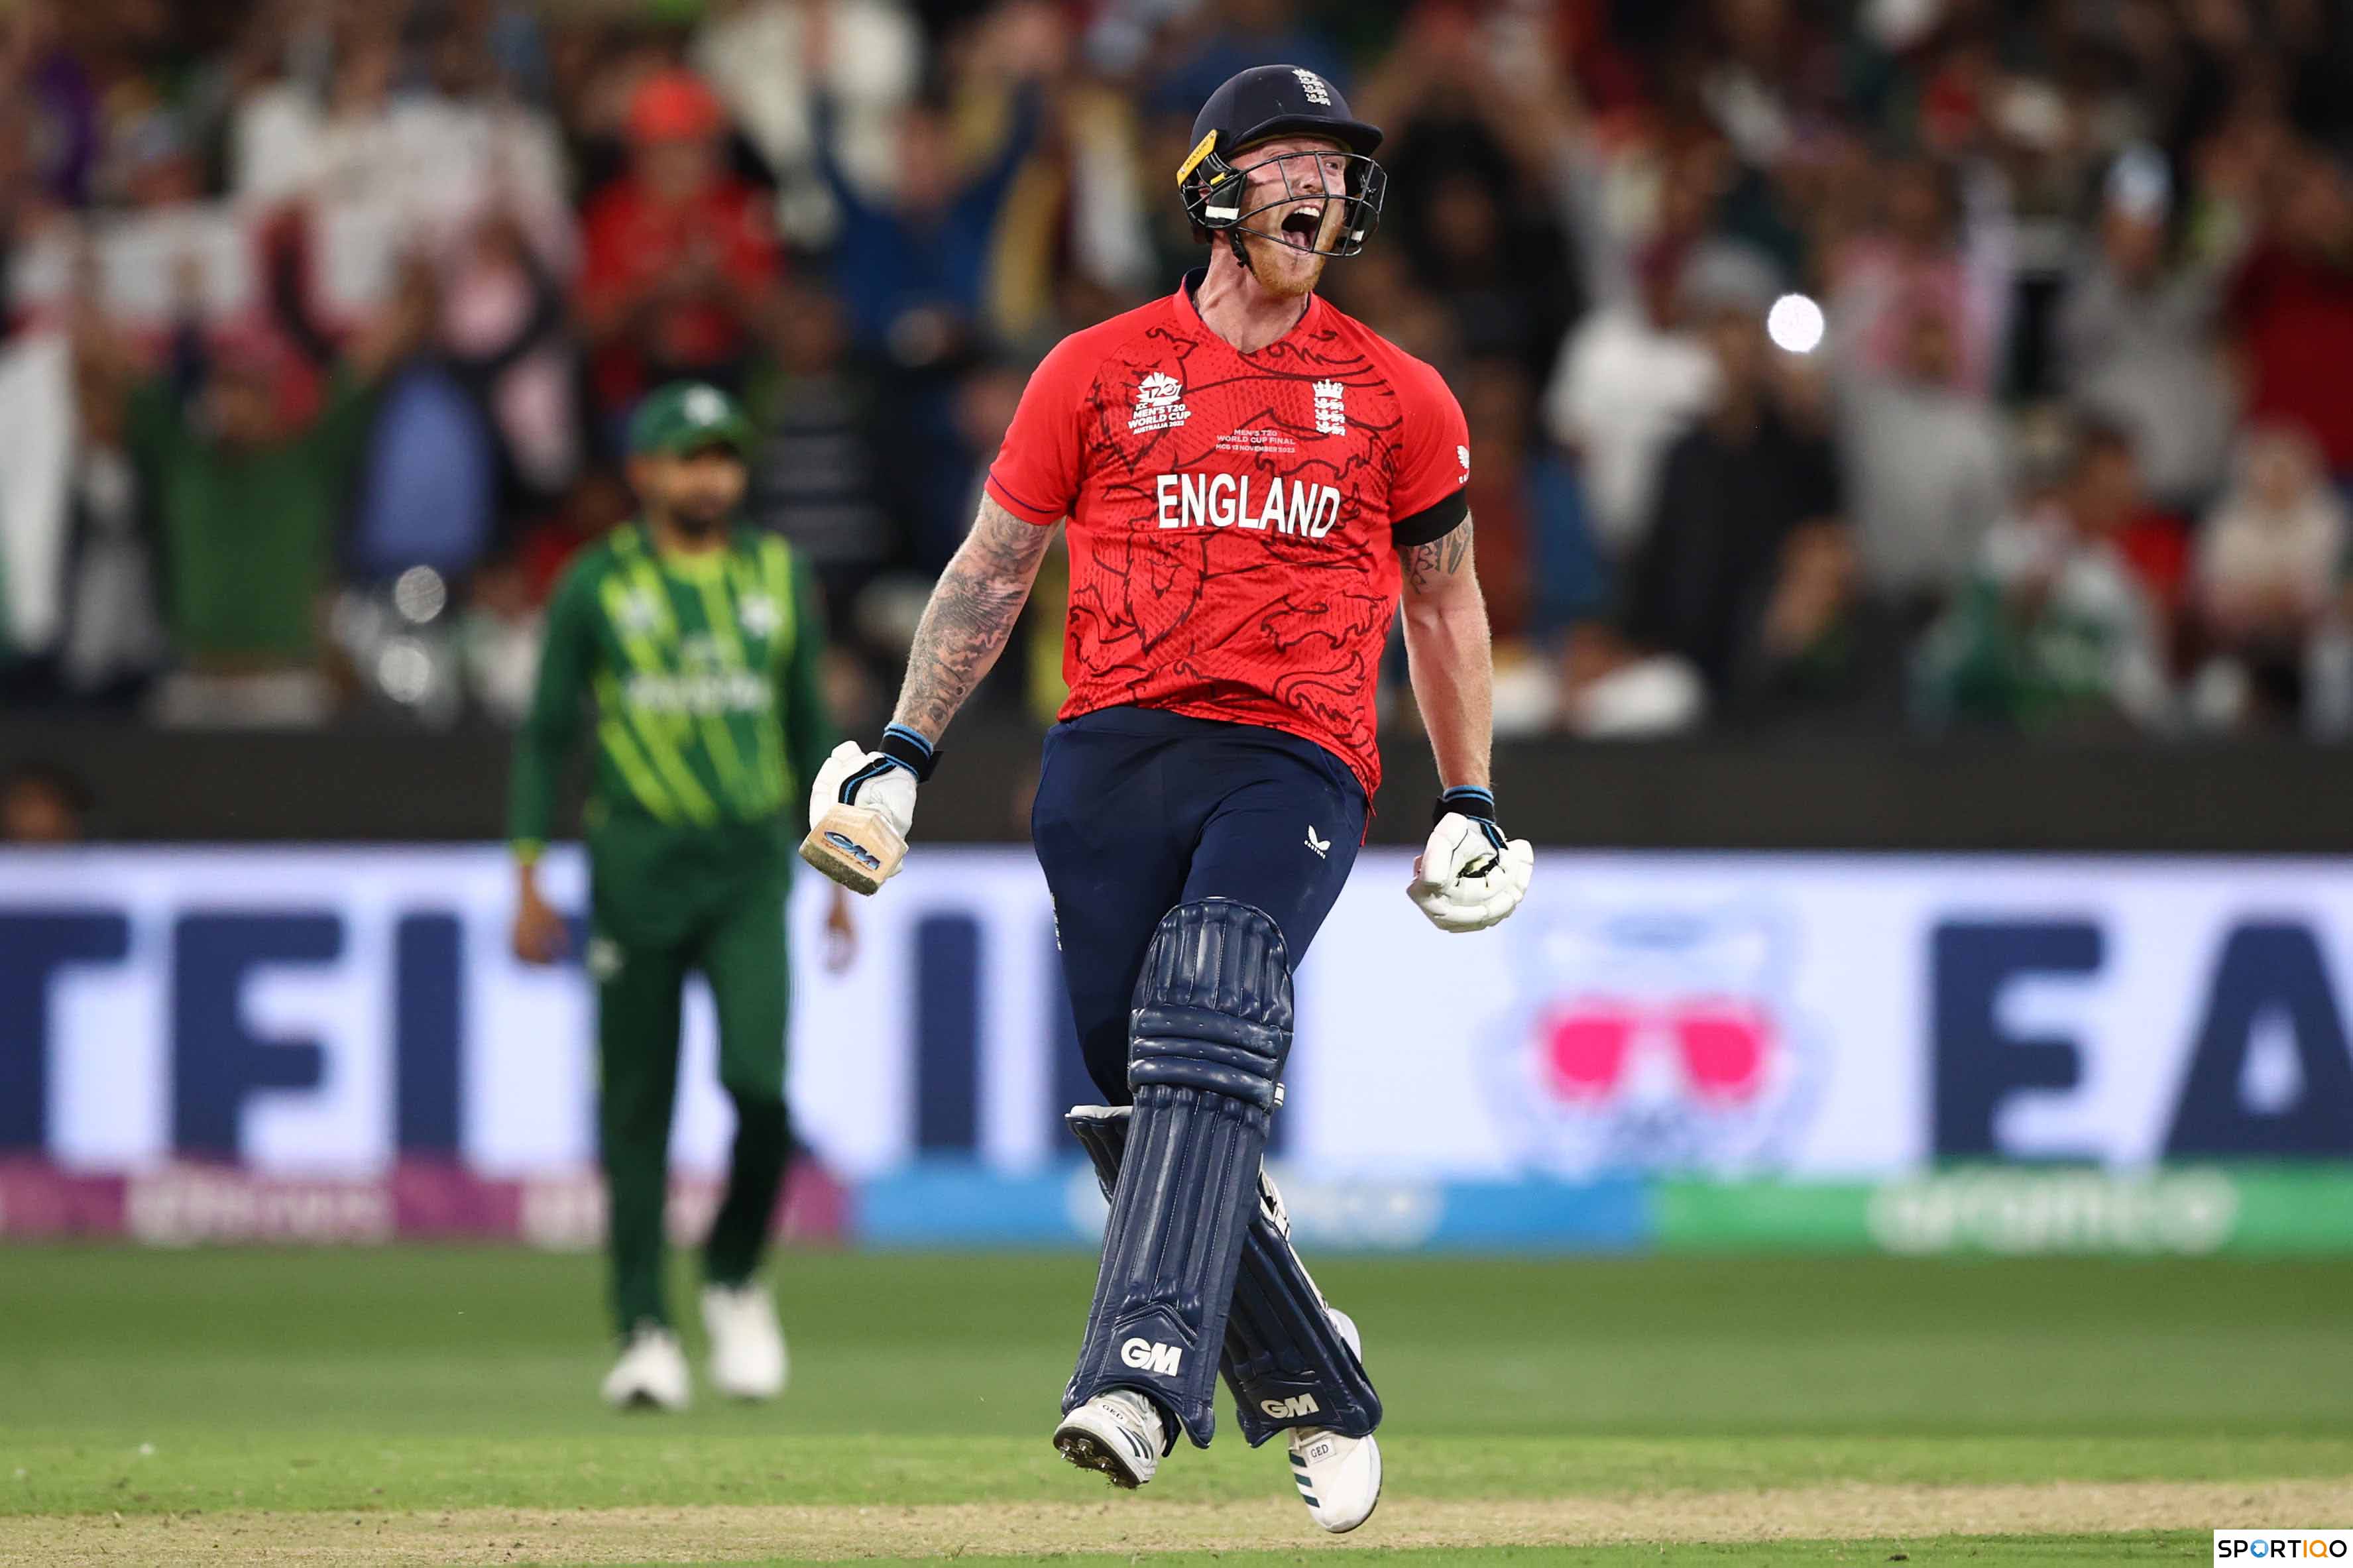 Ben Stokes after winning T20 World Cup for England